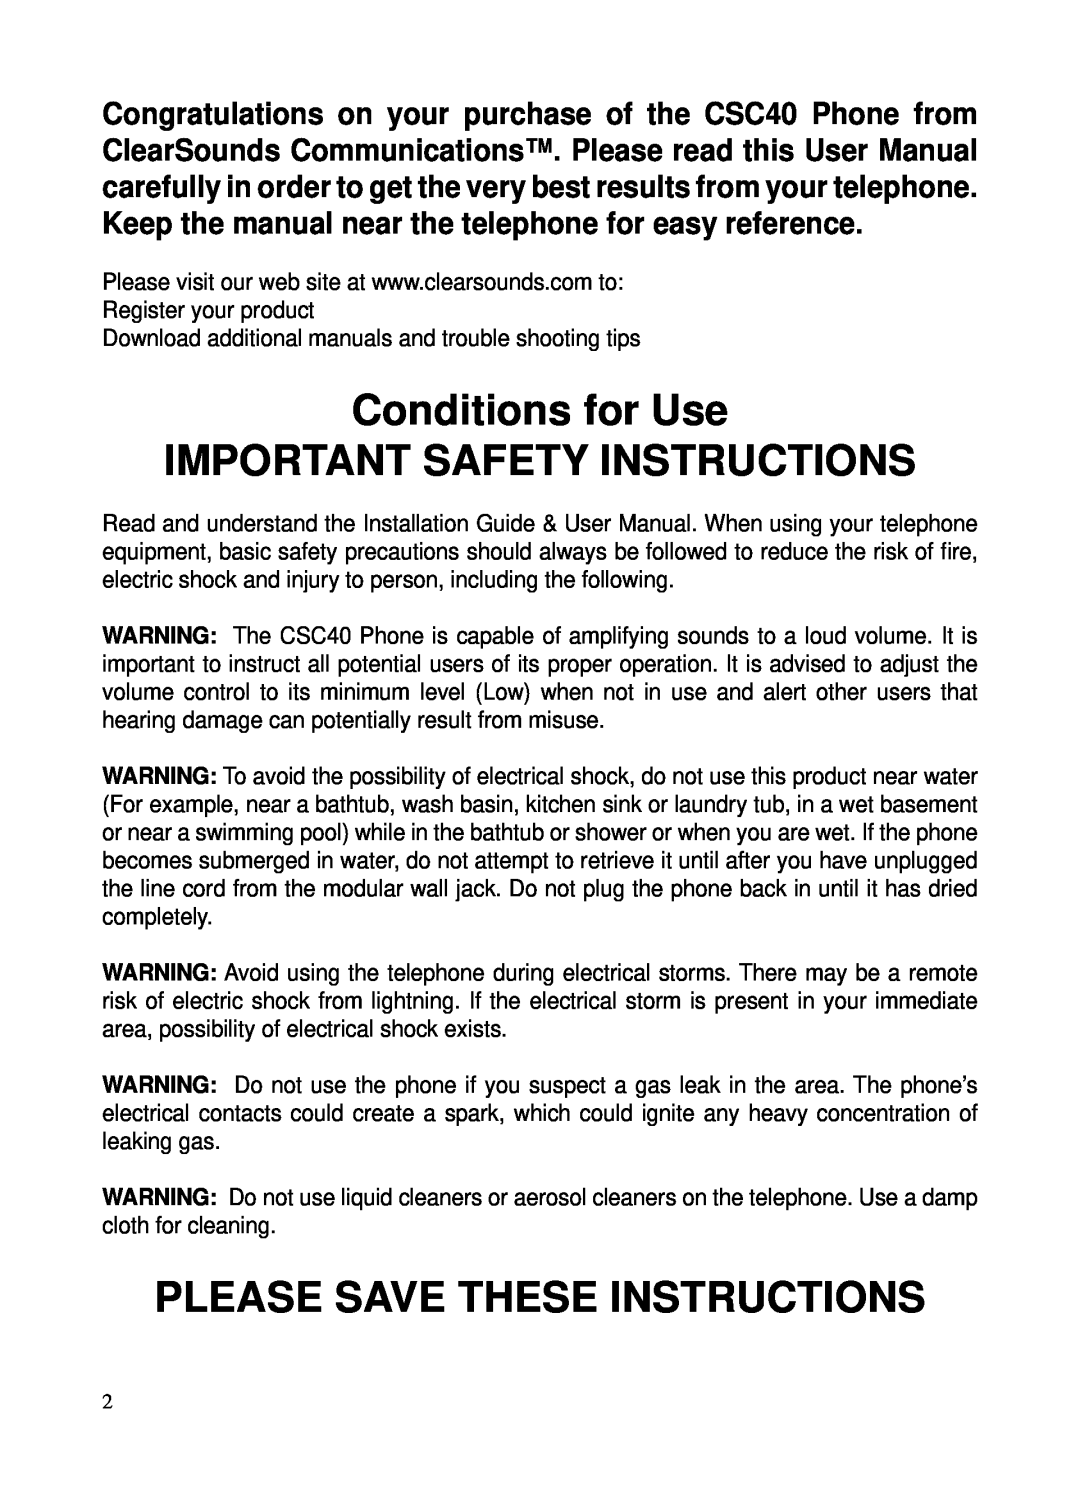 ClearSounds CSC40 user manual Conditions for Use IMPORTANT SAFETY INSTRUCTIONS, Please Save These Instructions 